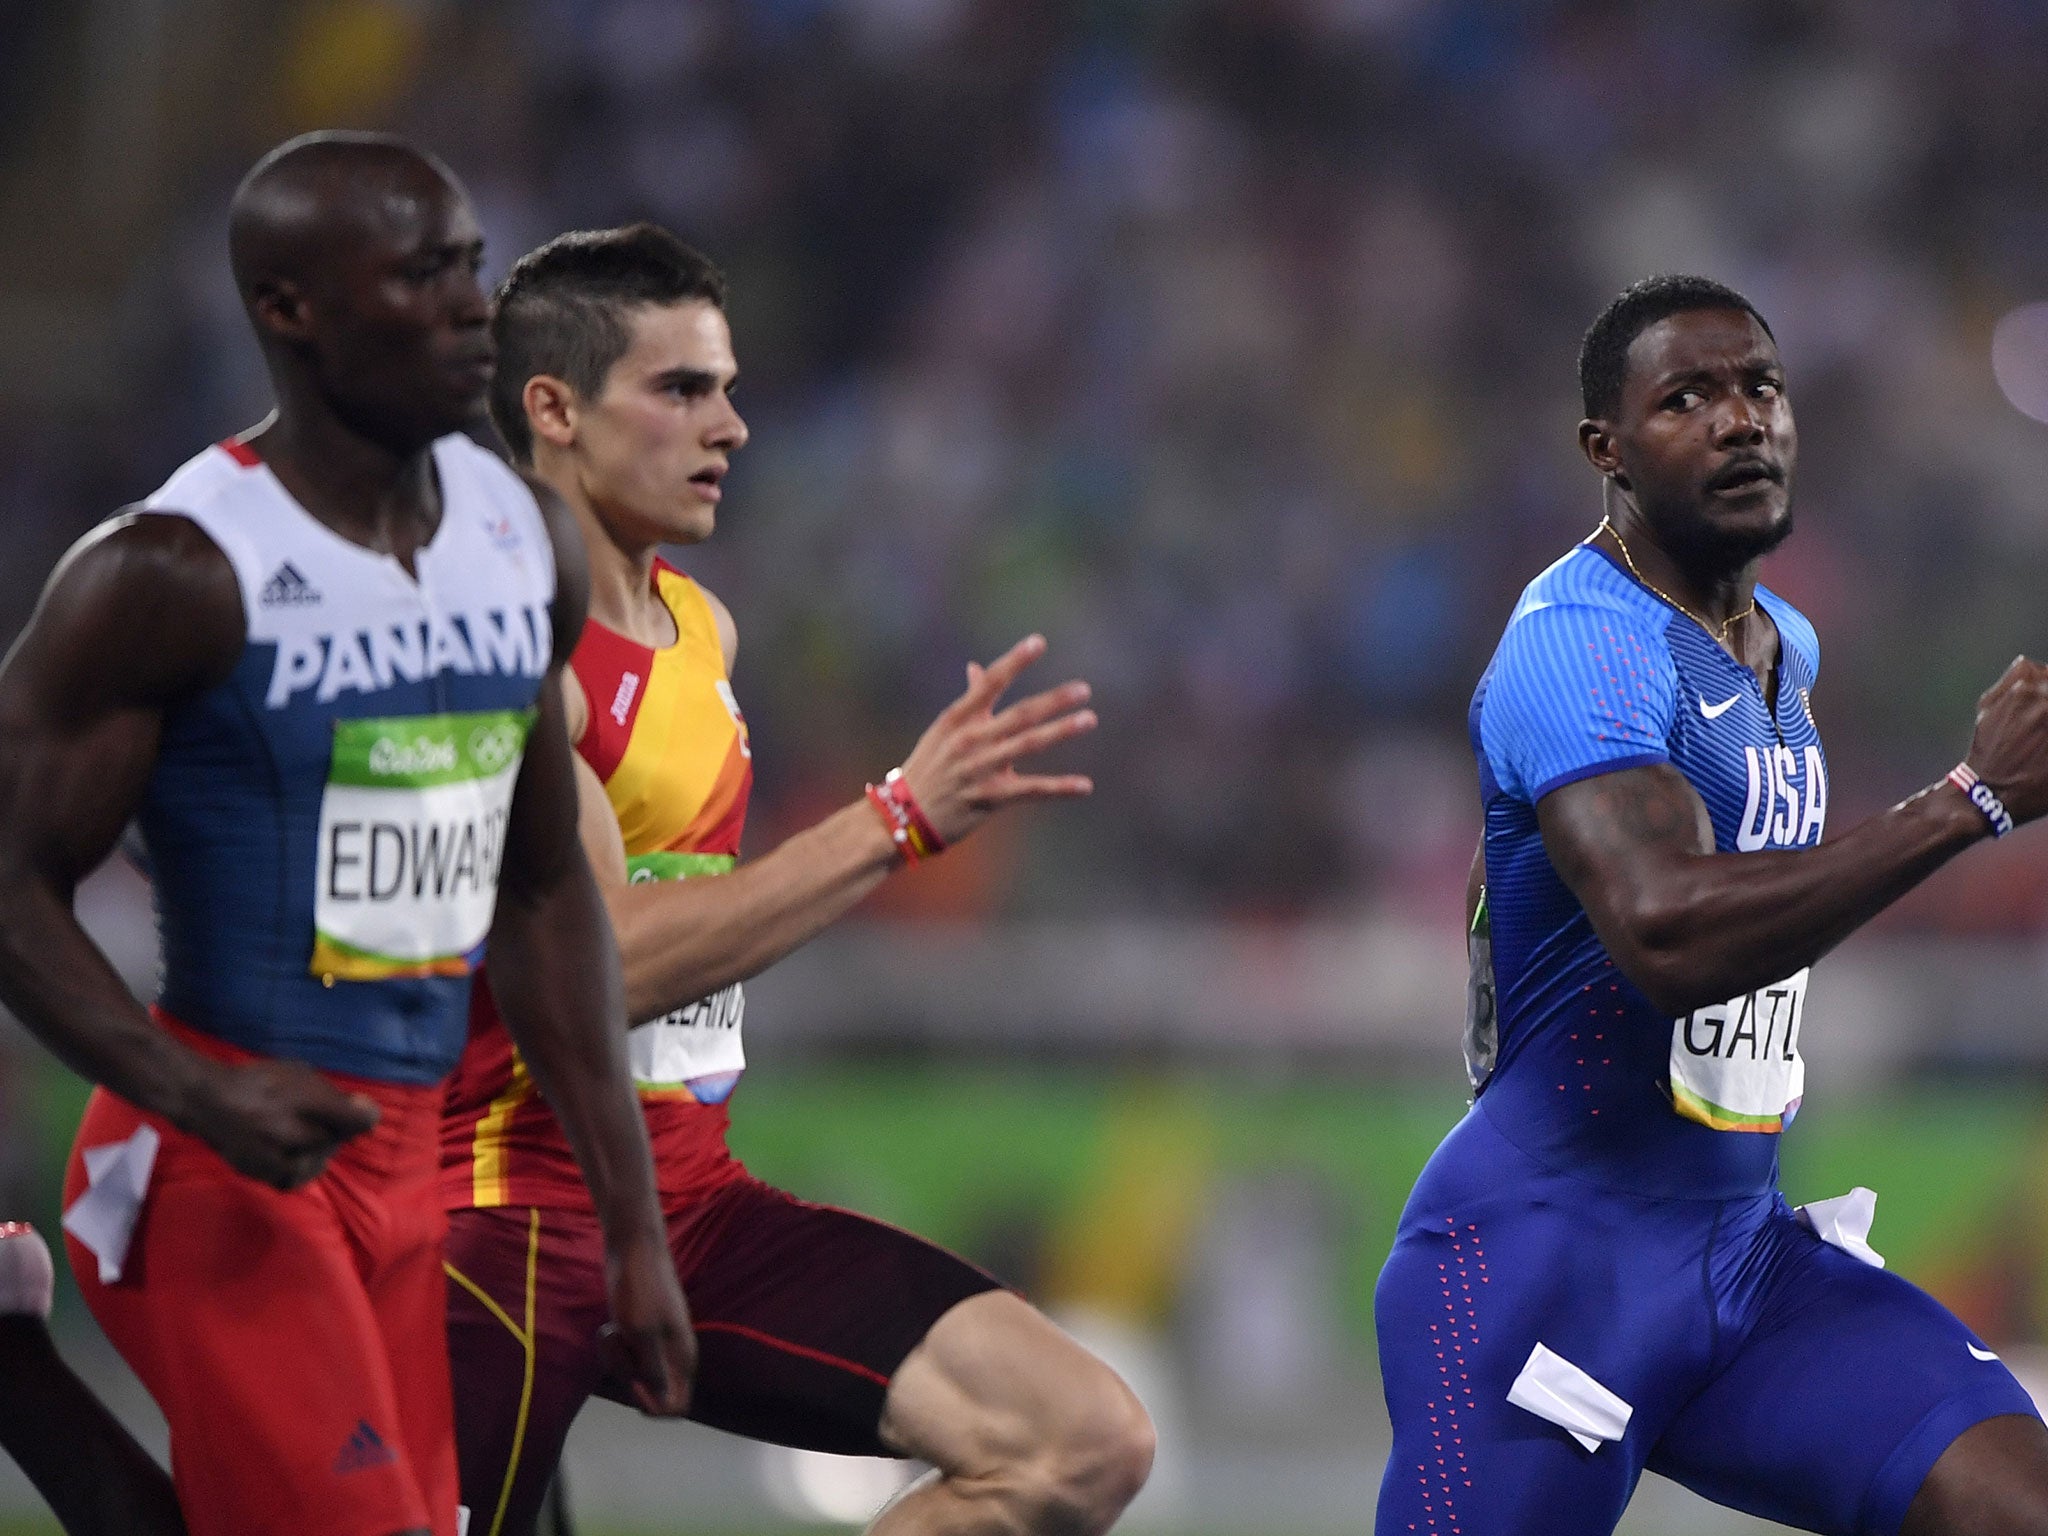 Gatlin looks back across the field at his opponents before the line